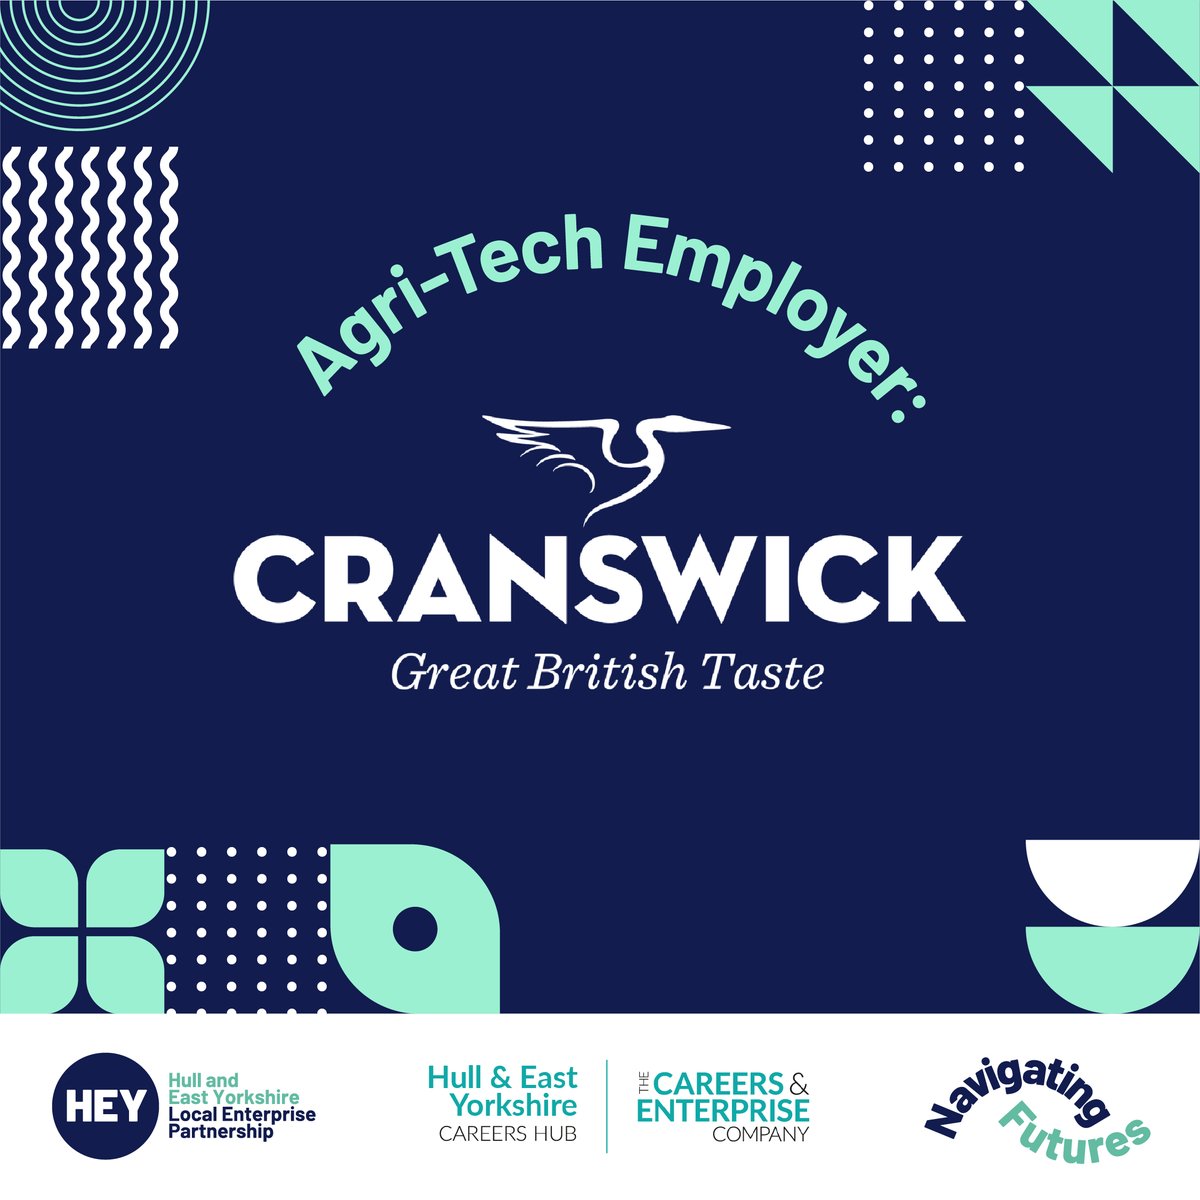 Cranswick was founded in East Yorkshire in 1975 and is now a leading food producer. It employs over 13,000 people – over half of which are based in Hull! #NavigatingFutures